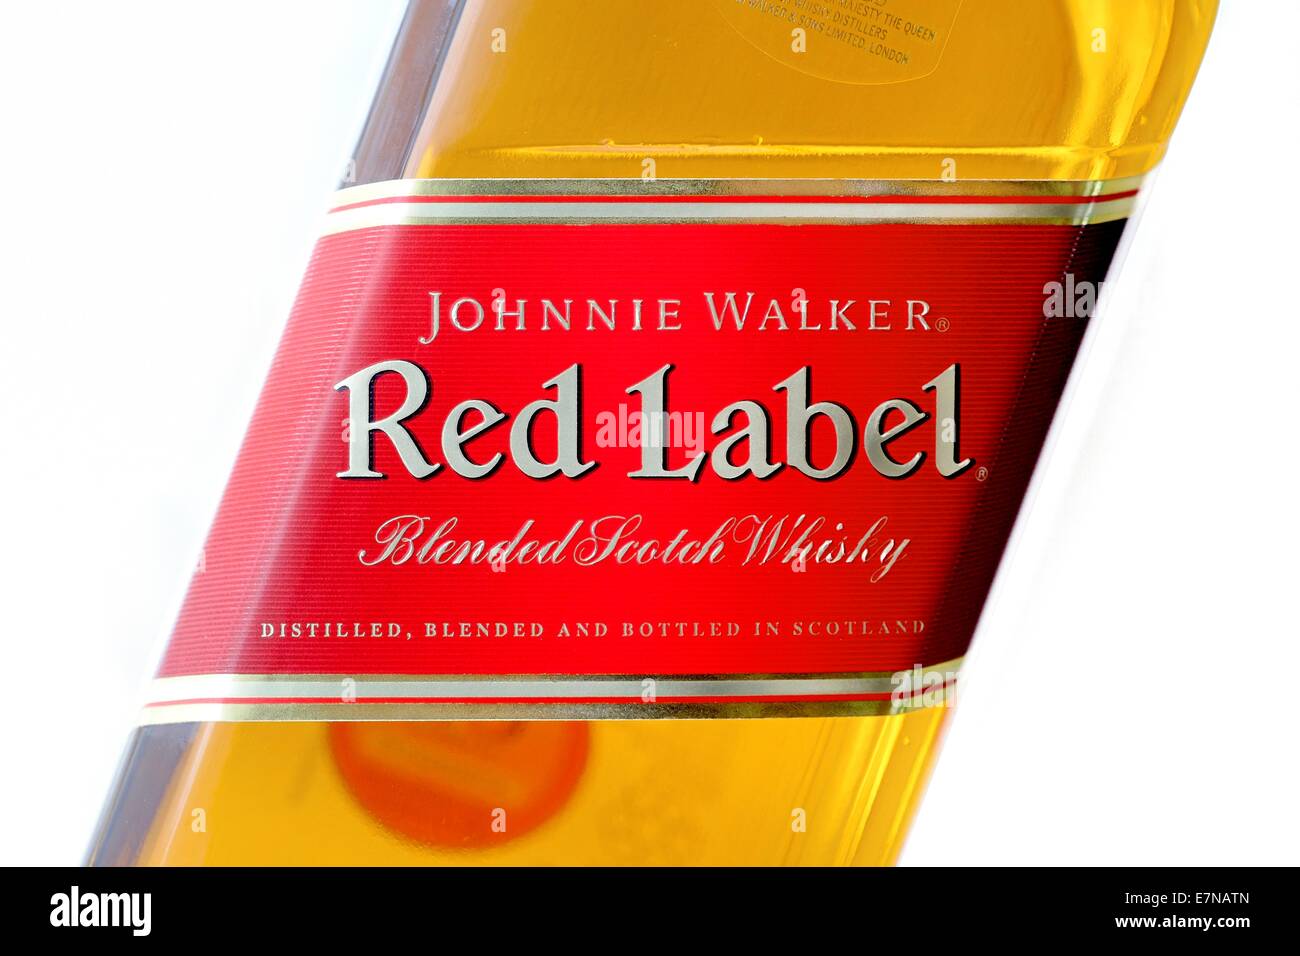 Johnnie walker red label blended scotch whisky Stock Photo